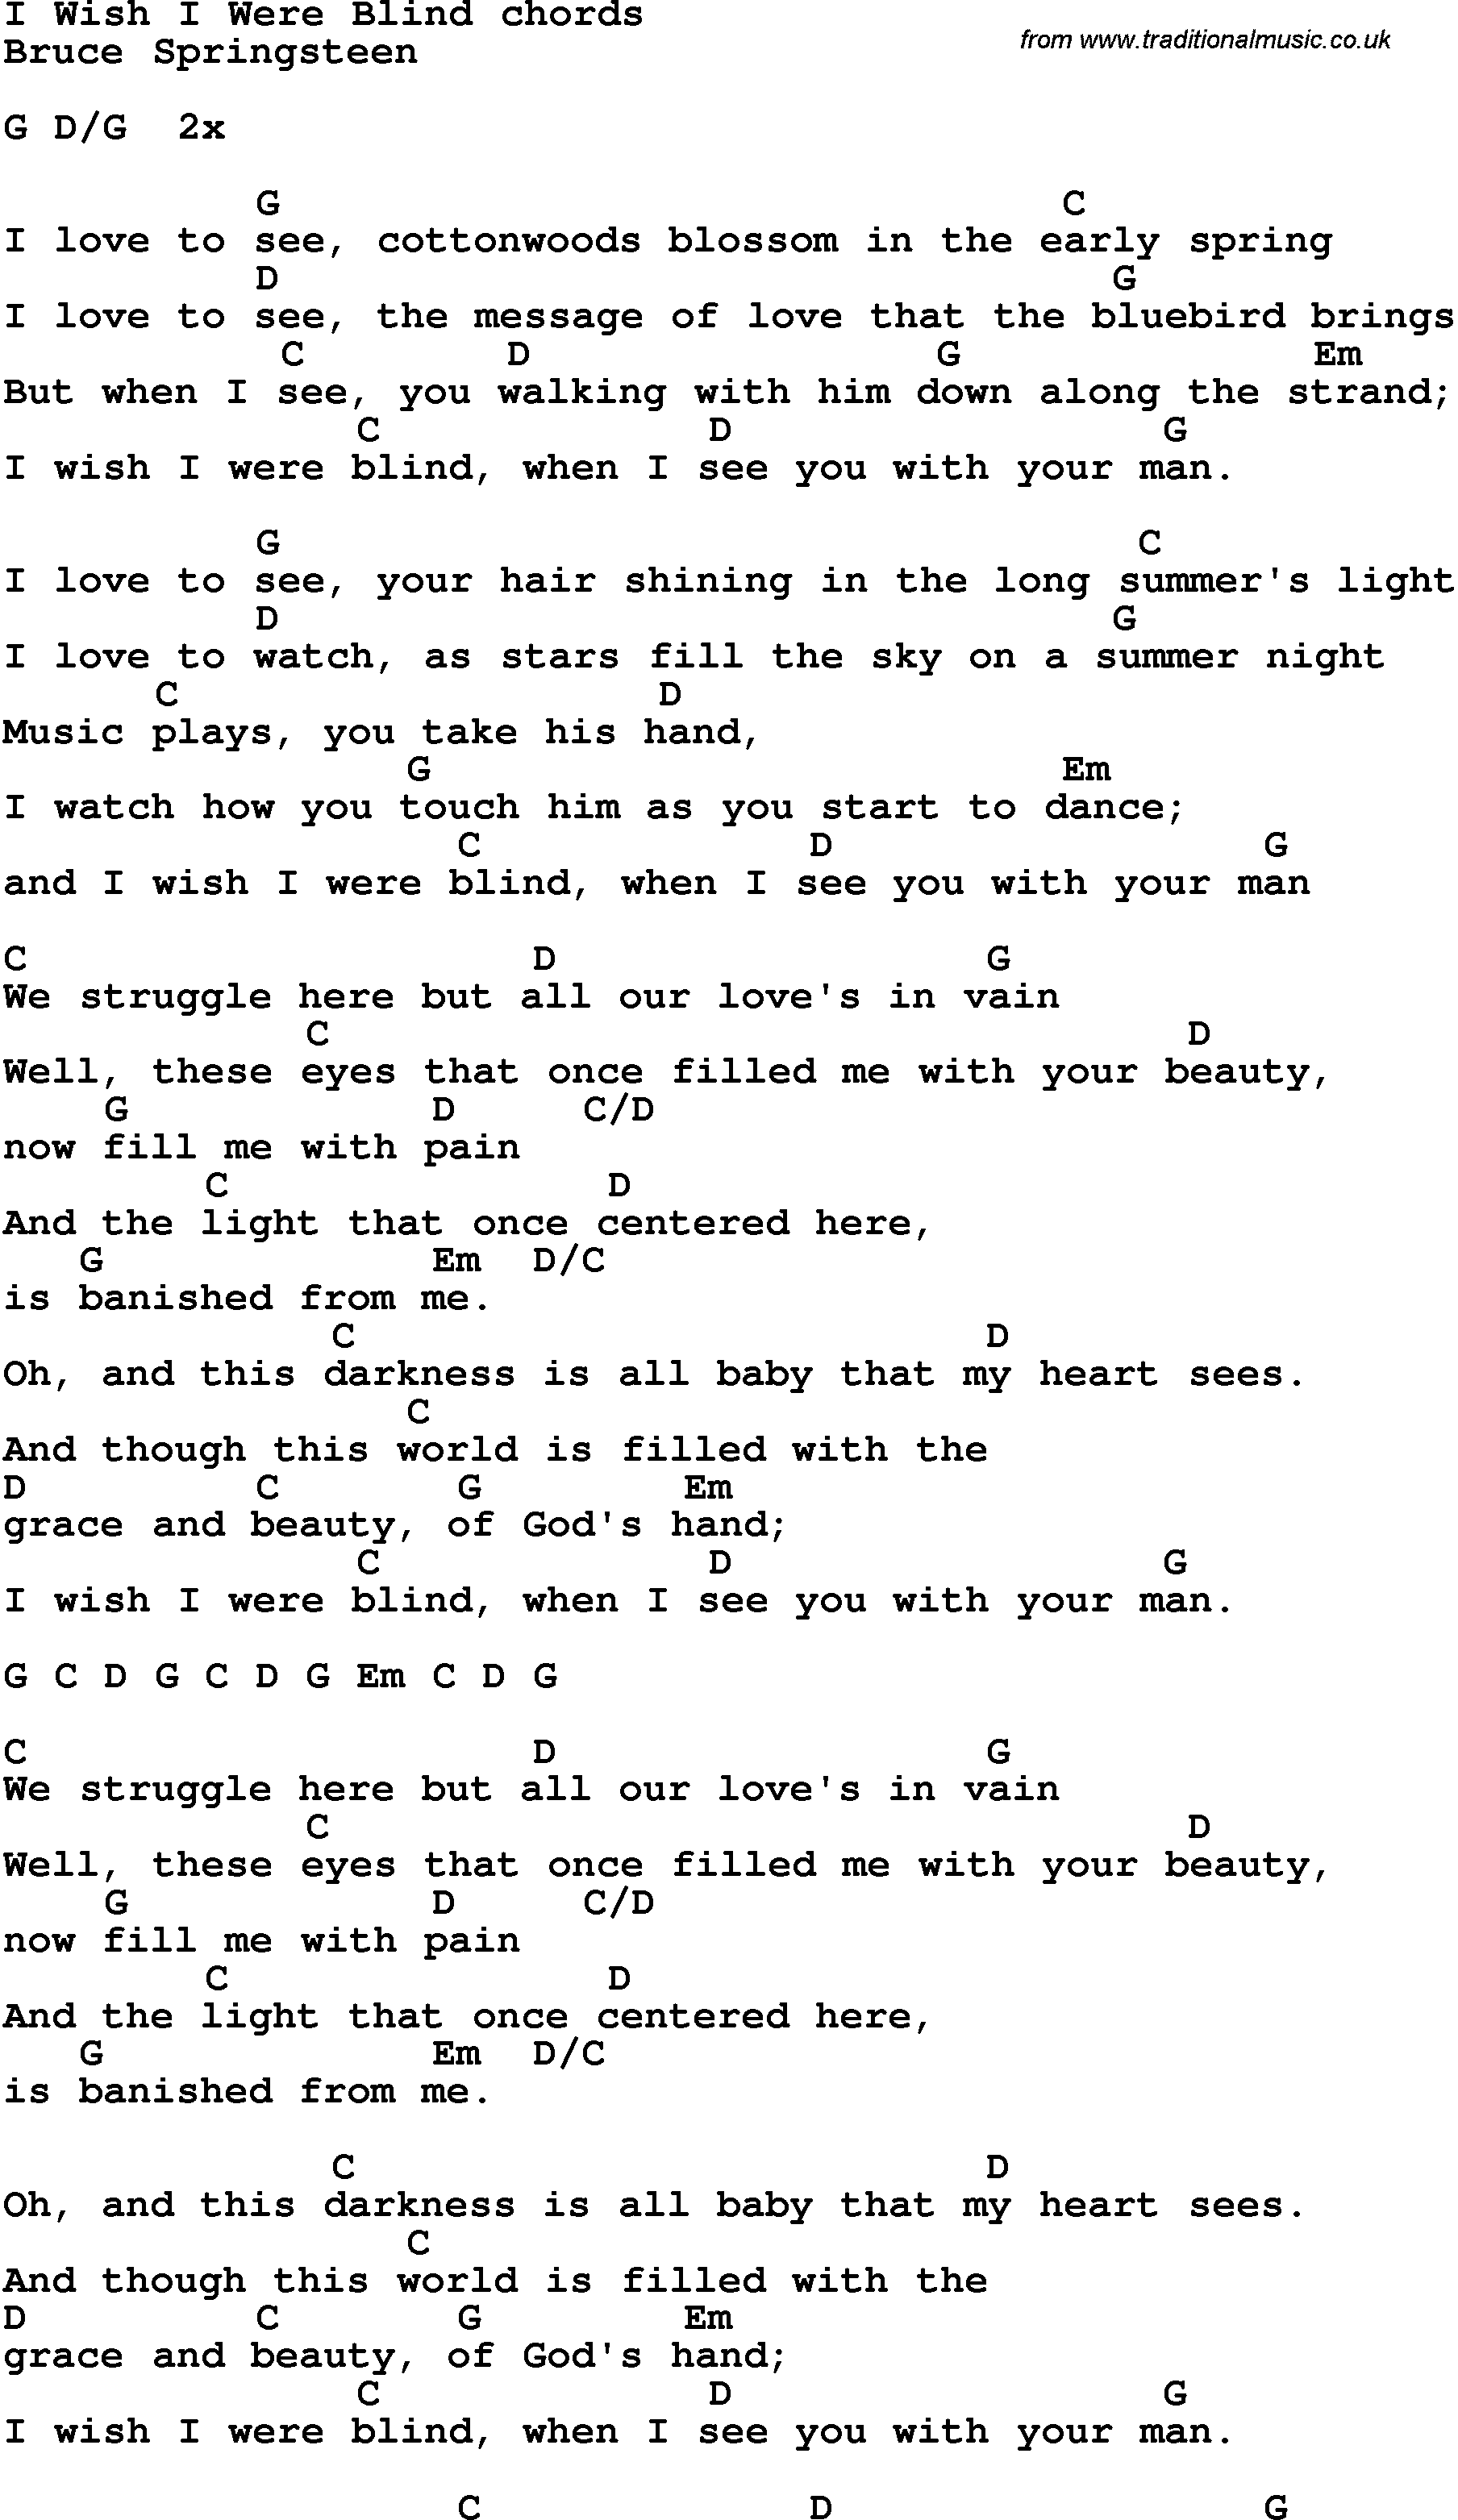 Song Lyrics with guitar chords for I Wish I Were Blind